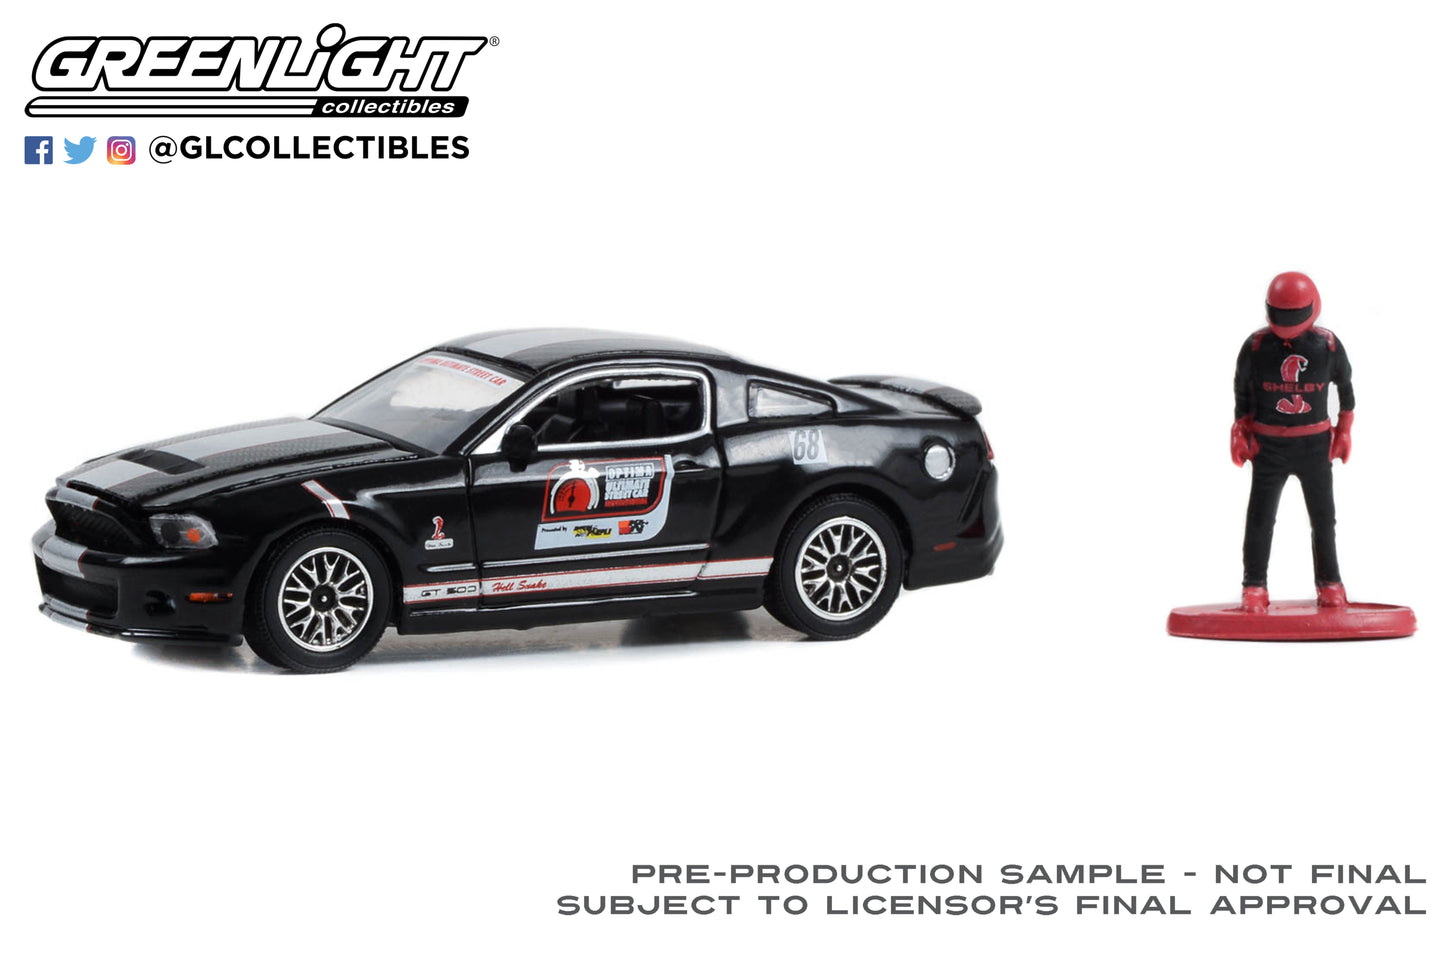 GreenLight 1:64 The Hobby Shop Series 15 - 2010 Ford Shelby GT500 #68 - OPTIMA Ultimate Street Car Invitational with Race Car Driver 97150-E